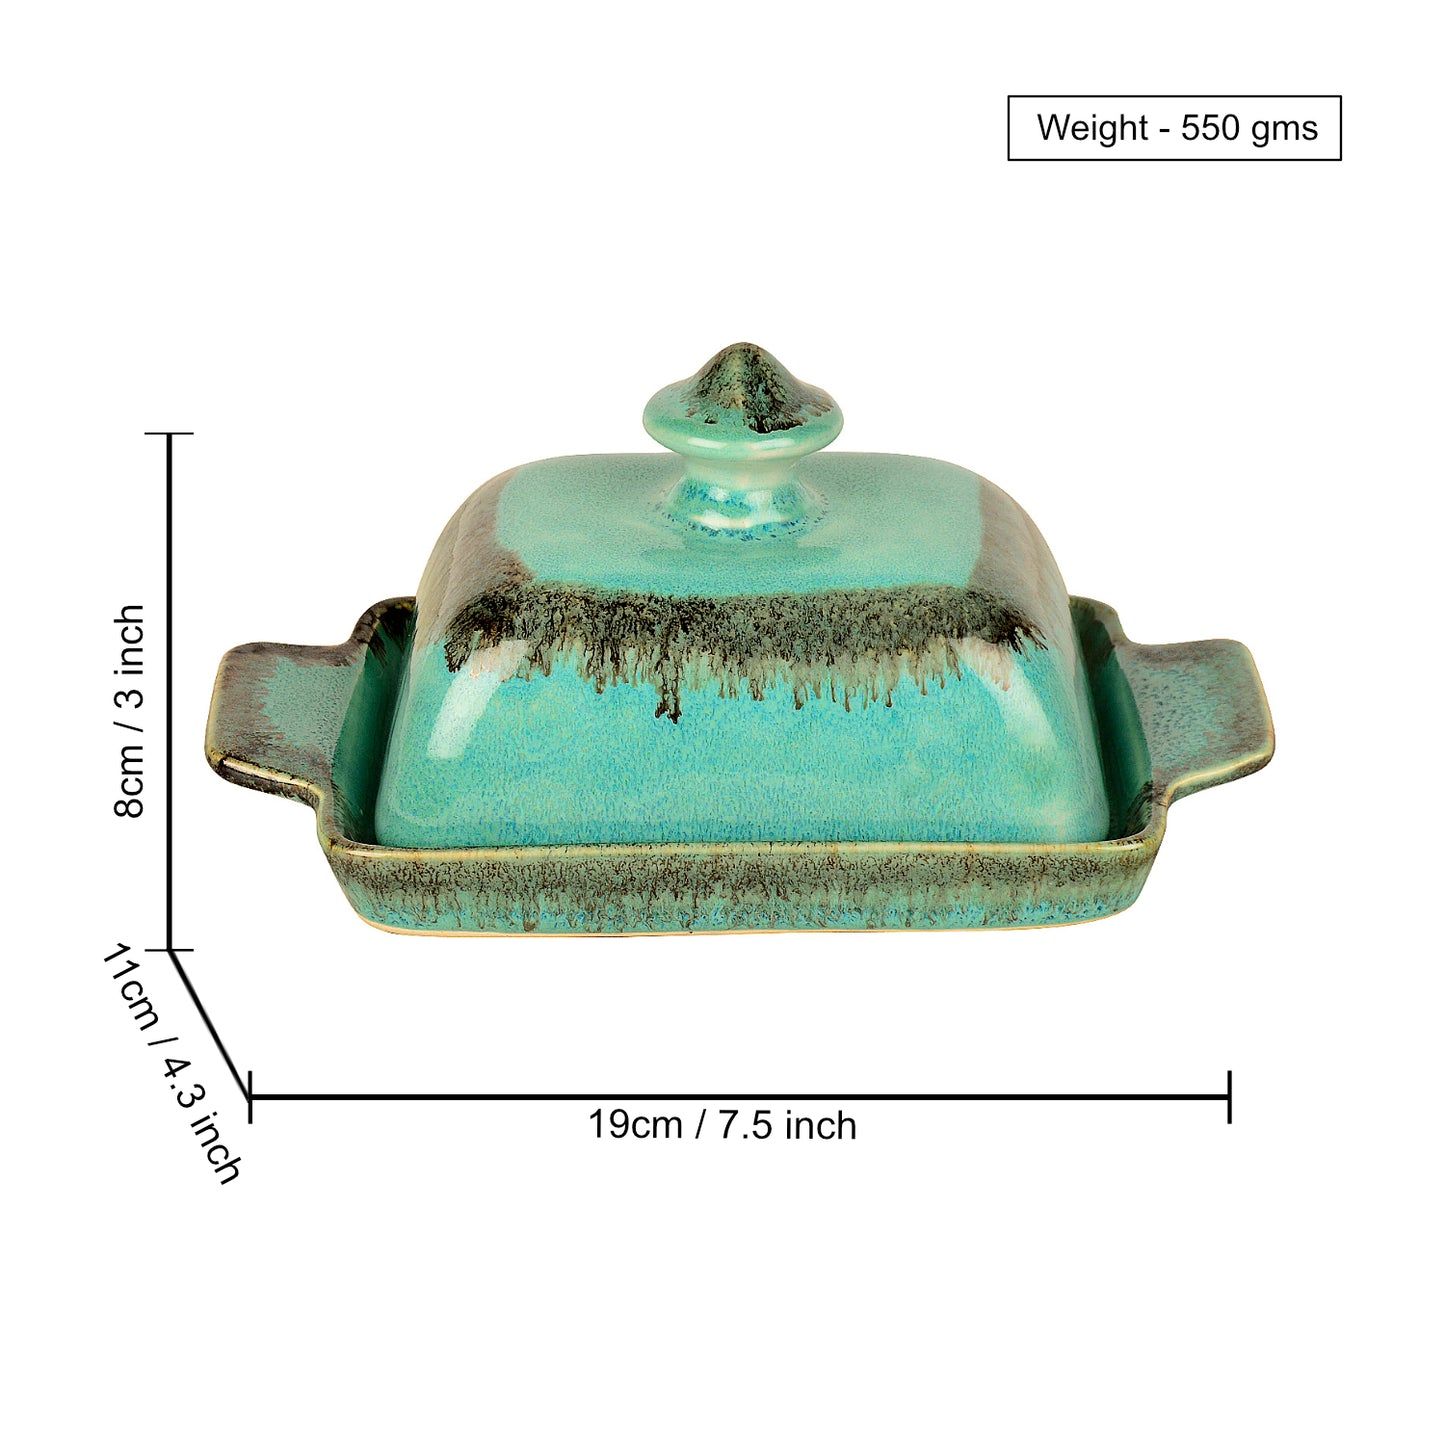 Studio Pottery Ceramic Butter Dish with Lid (Sea Green)